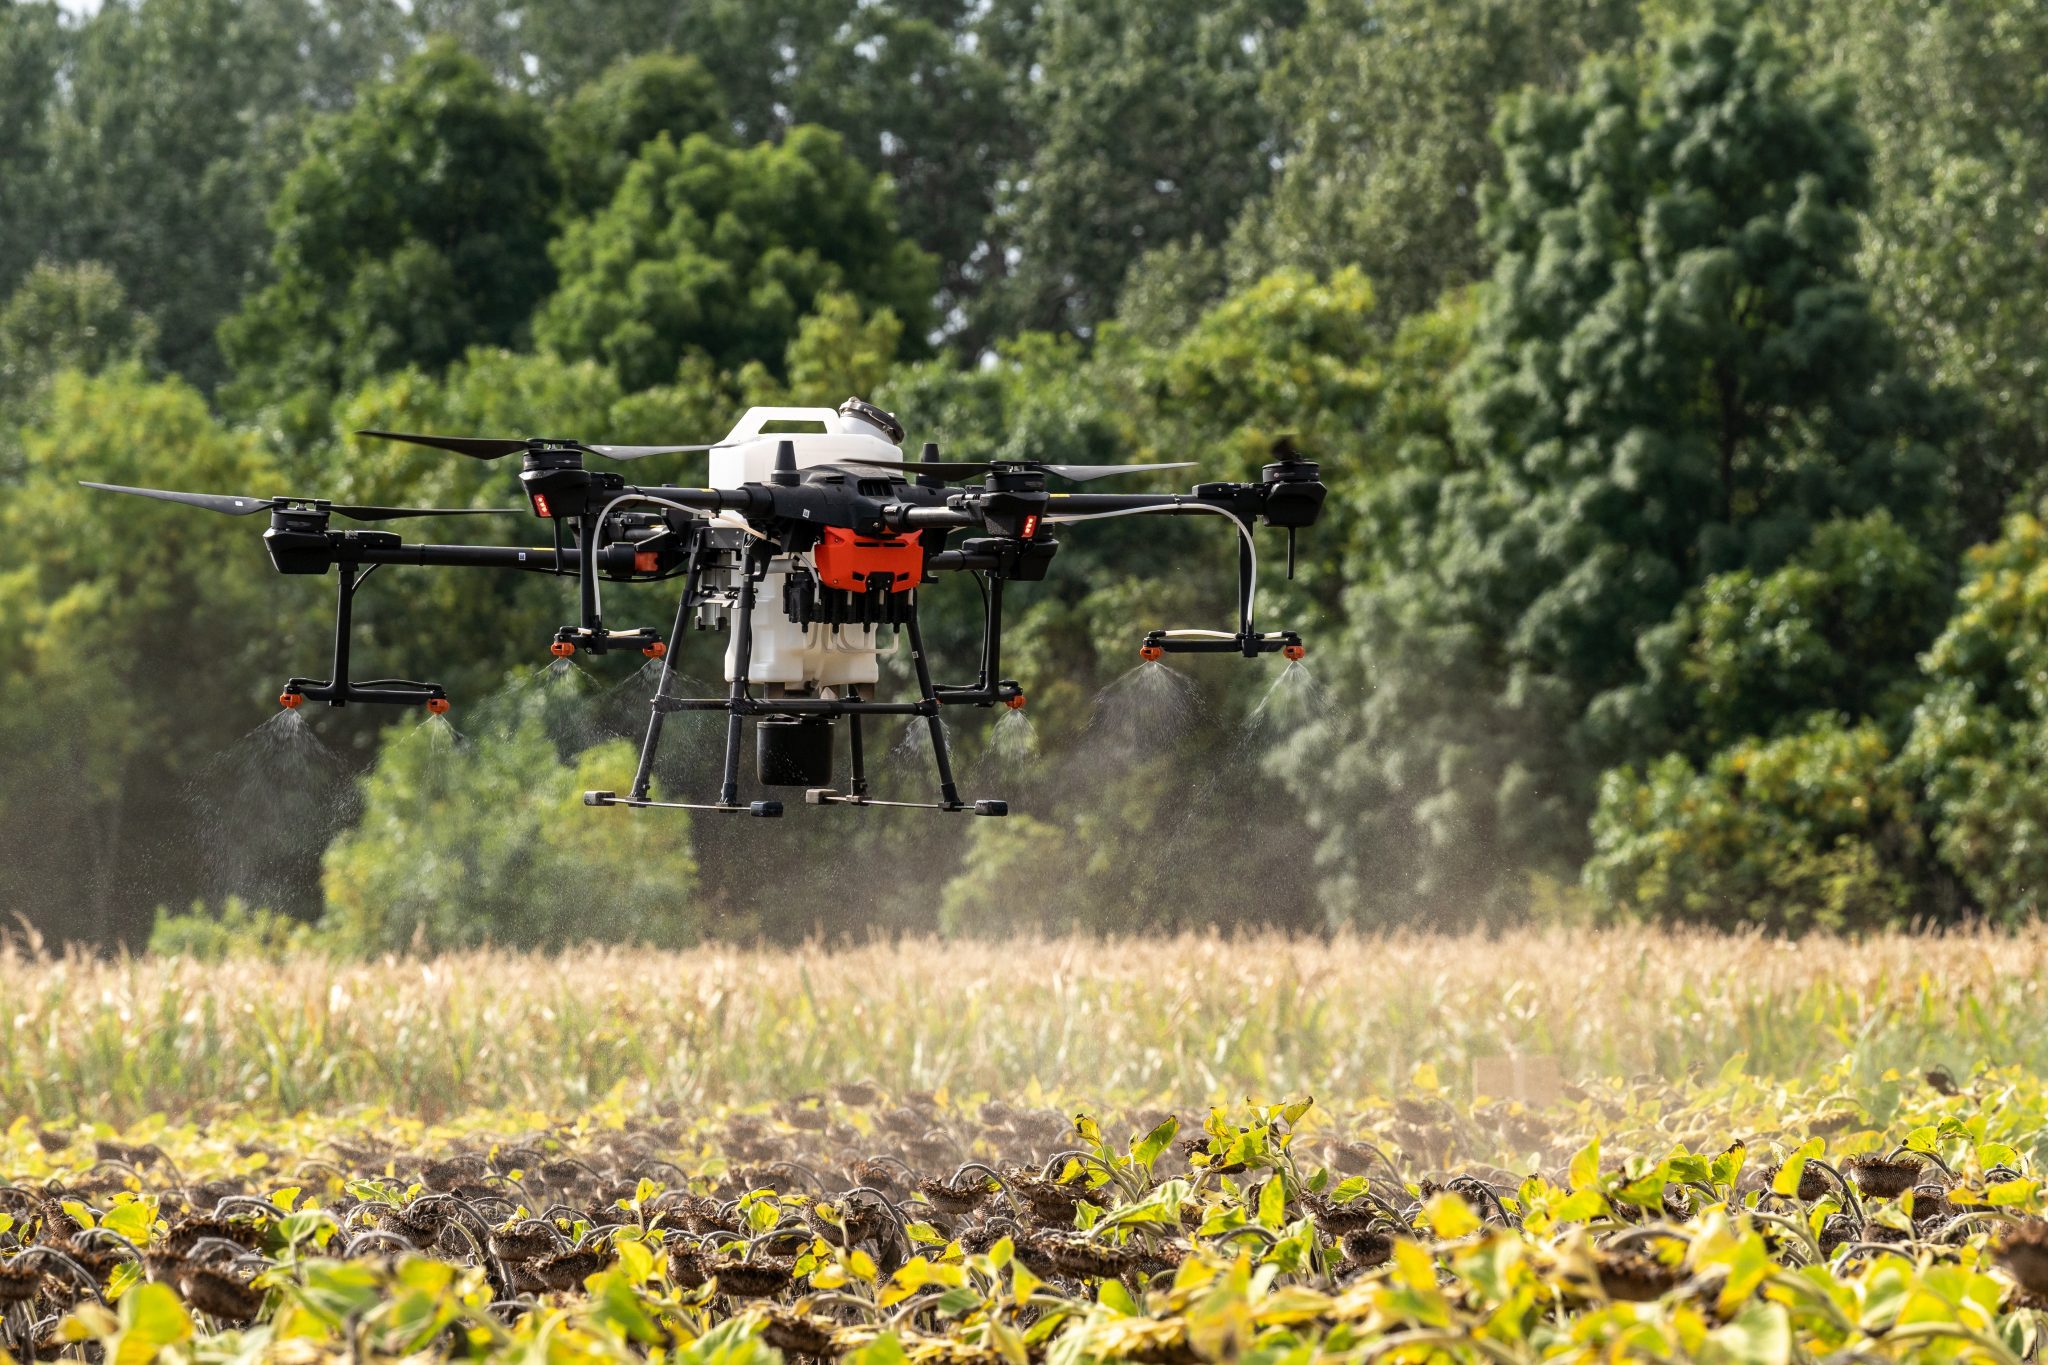 DJI AGRAS drone spraying an agriculture field